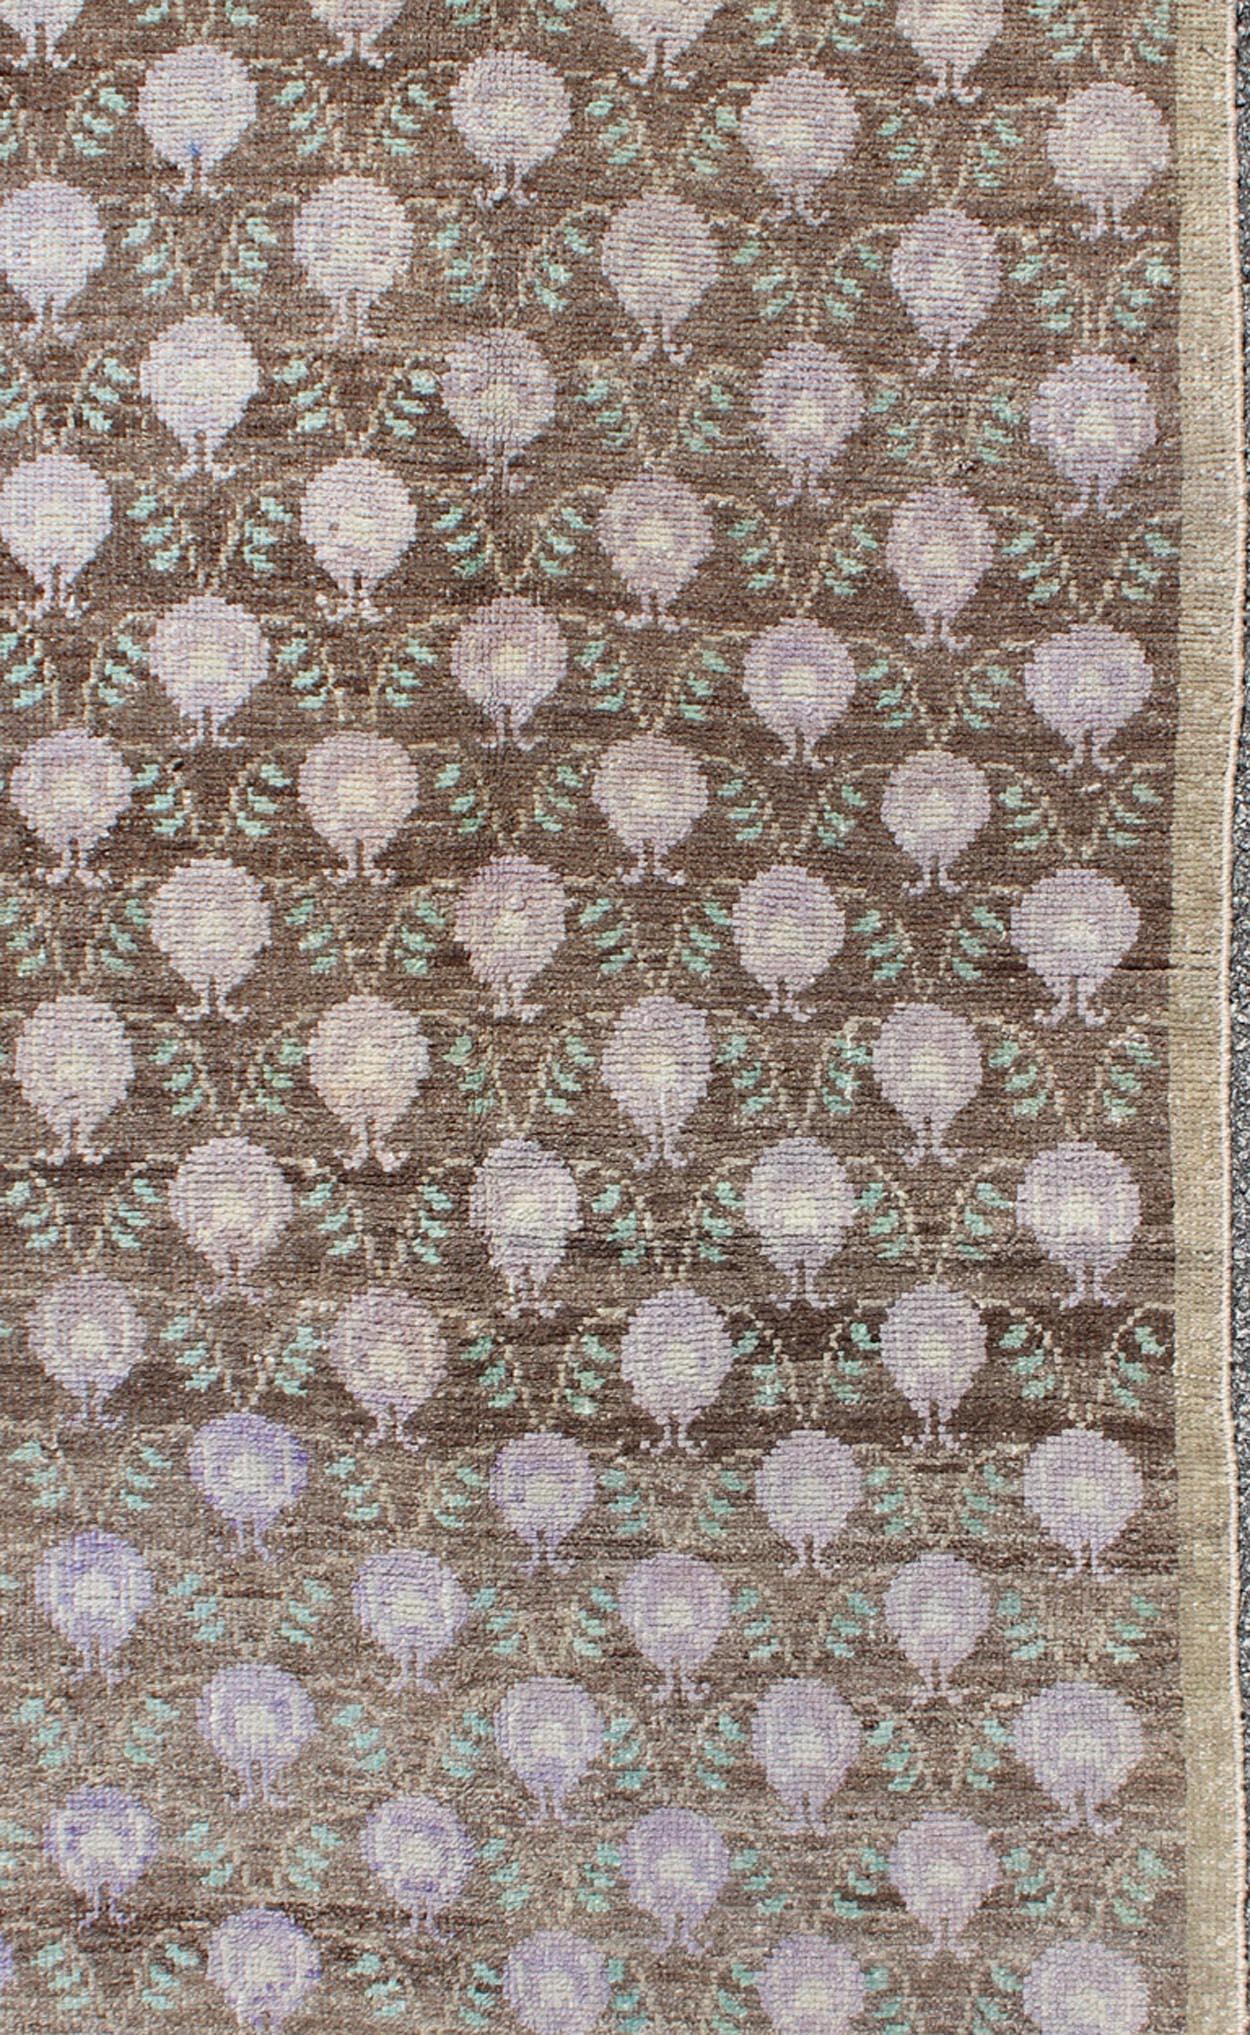 This vintage Turkish Tulu carpet (circa mid-20th century) features an all-over pattern of vining latticework flanked by cream half-moon shapes. Colors include taupe, brown, green, and lavender. These marvelous combinations make this rug suited for a